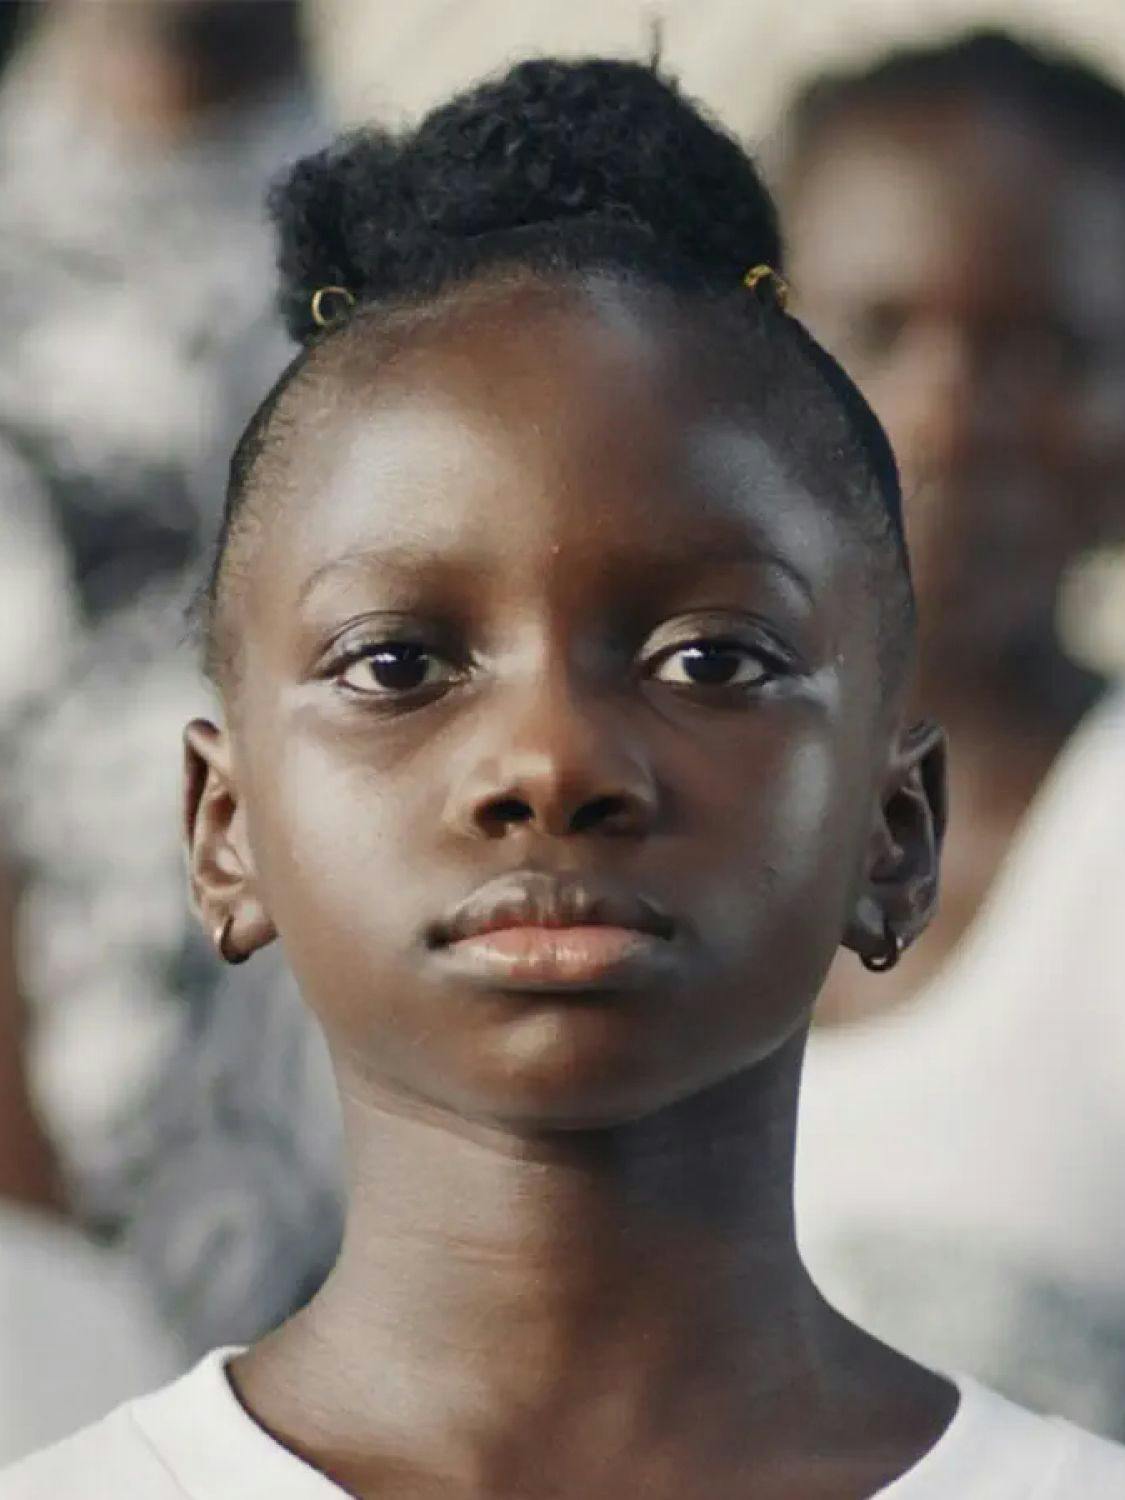 Determined African child facing looking us in the eyes